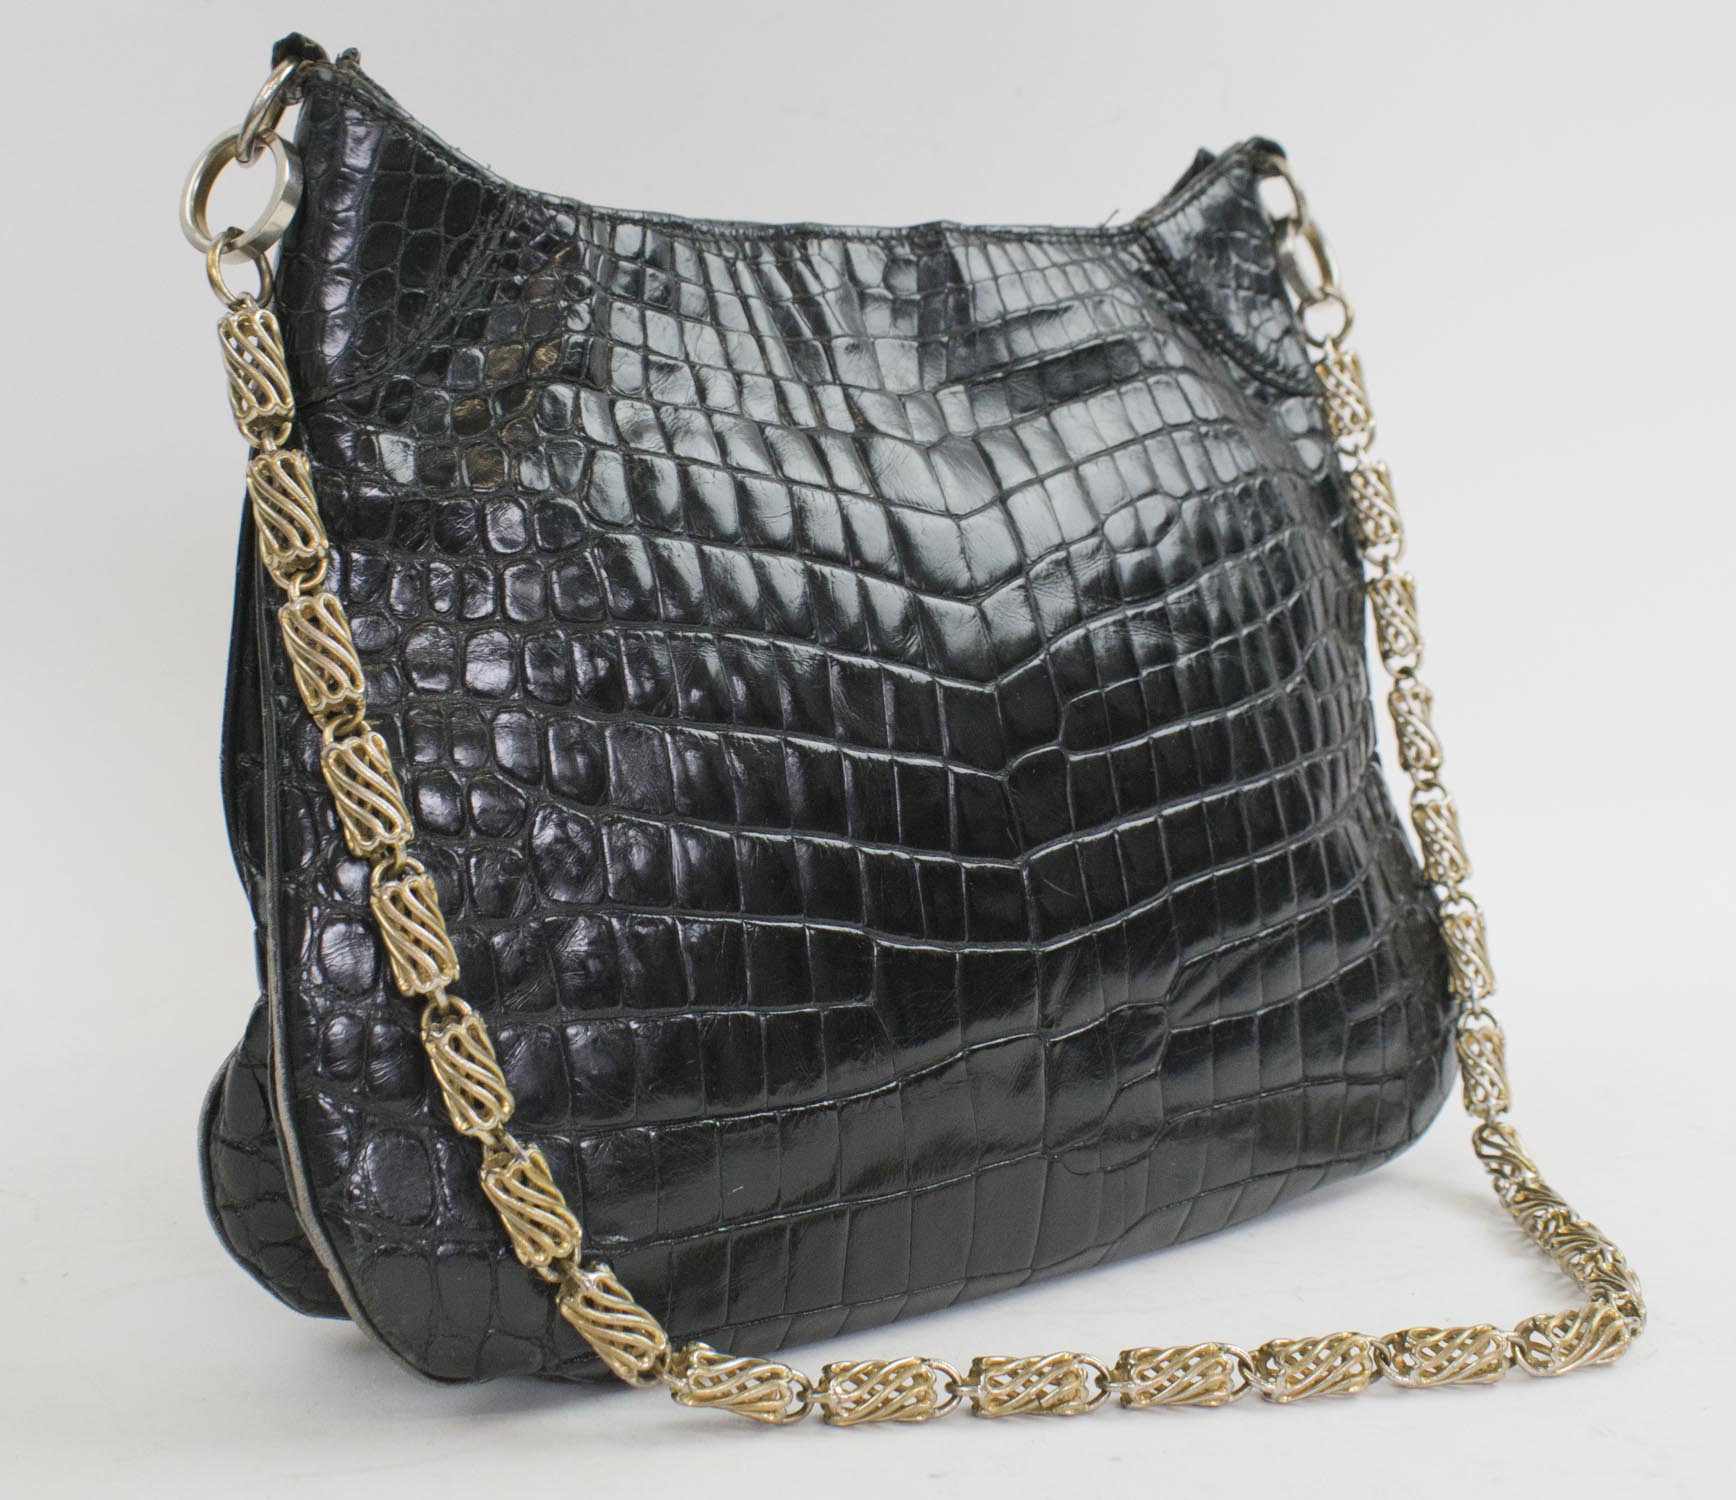 GUCCI VINTAGE CROCODILE BAGS, one with two top handles and flap closure,  gold tone hardware with back pocket, 24cm x 17cm and another demi lune form  with single chain strap and top